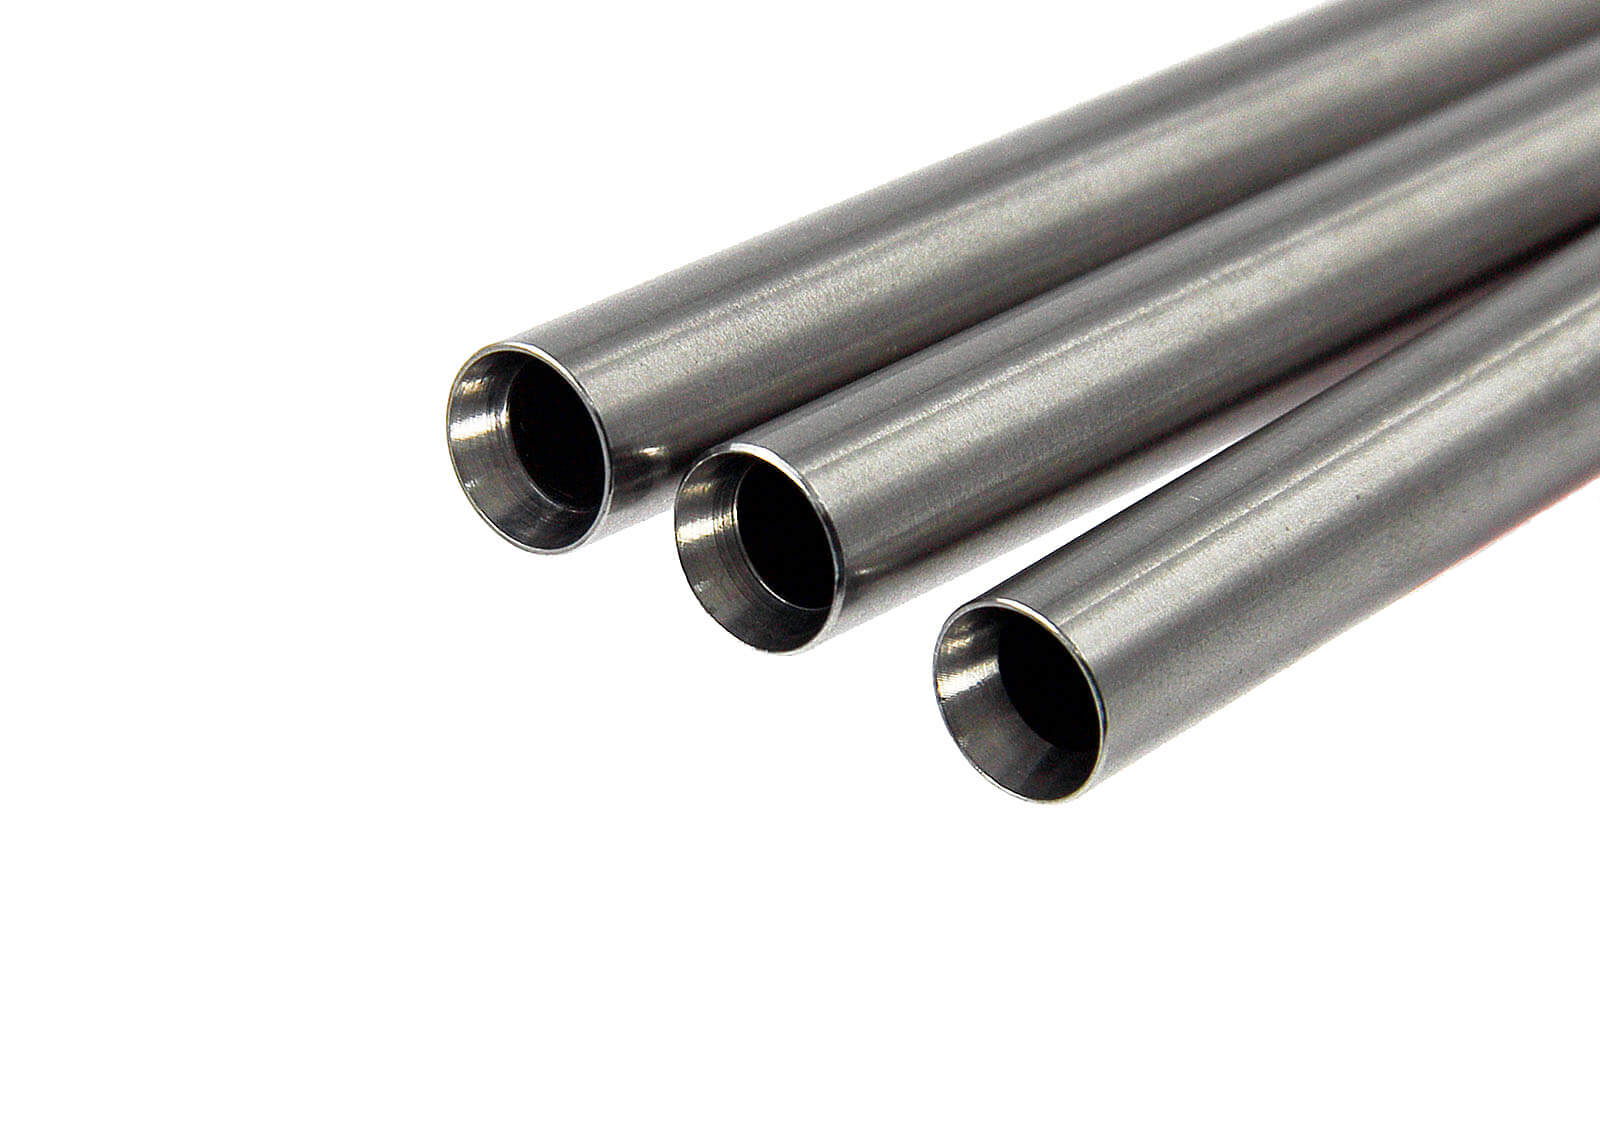 Stainless Steel 6.03mm Precision GBB Inner Barrel 113mm - Modify Airsoft Parts